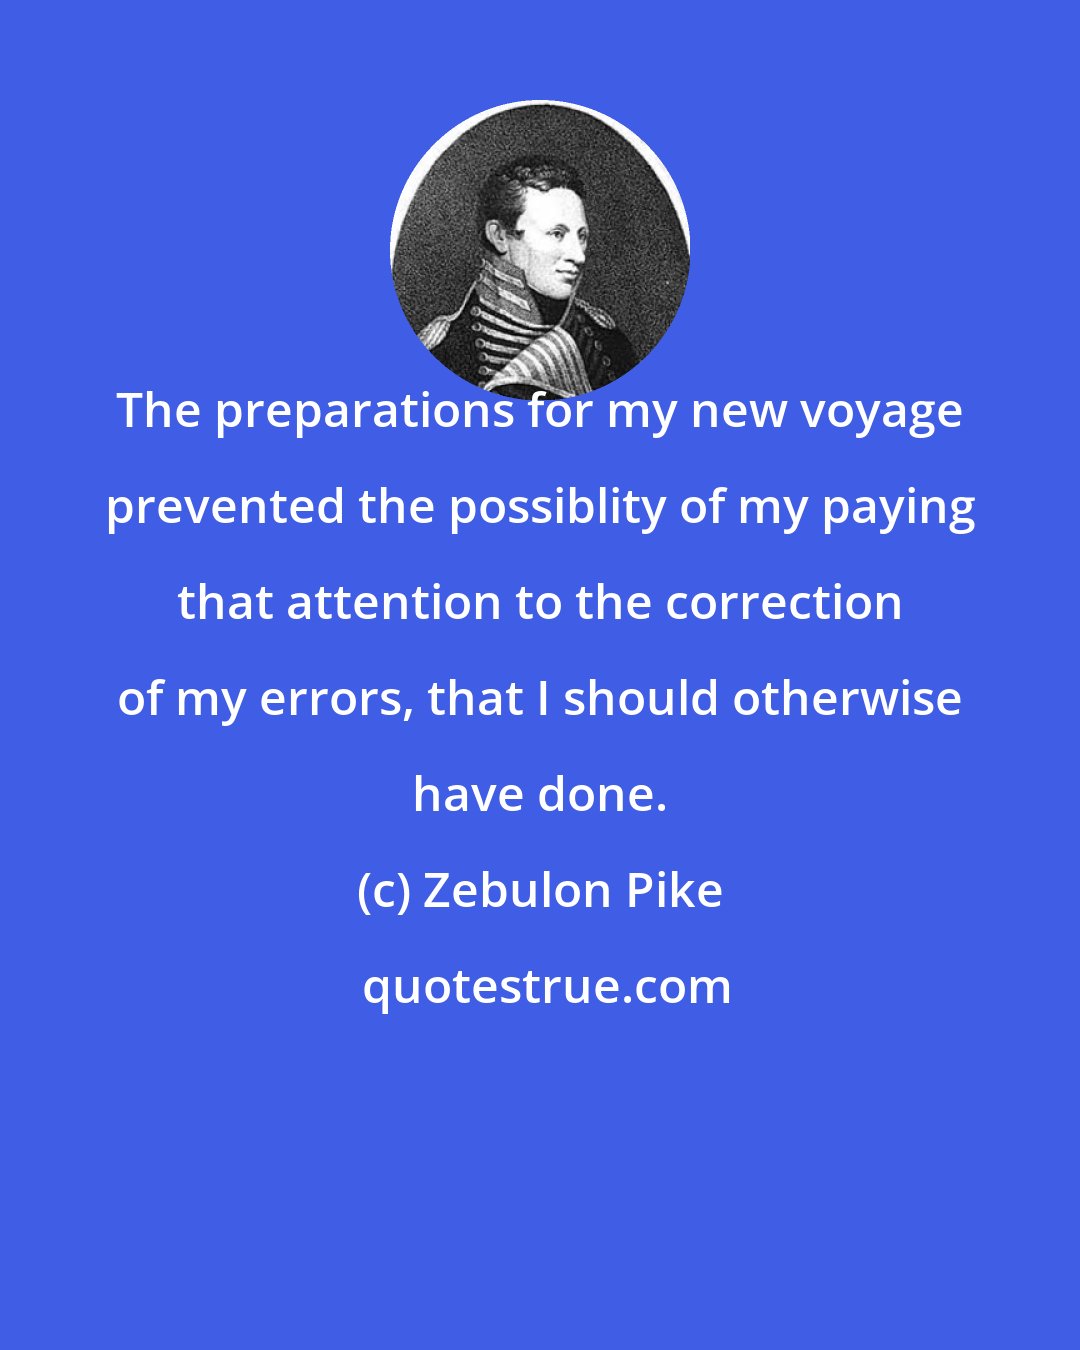 Zebulon Pike: The preparations for my new voyage prevented the possiblity of my paying that attention to the correction of my errors, that I should otherwise have done.